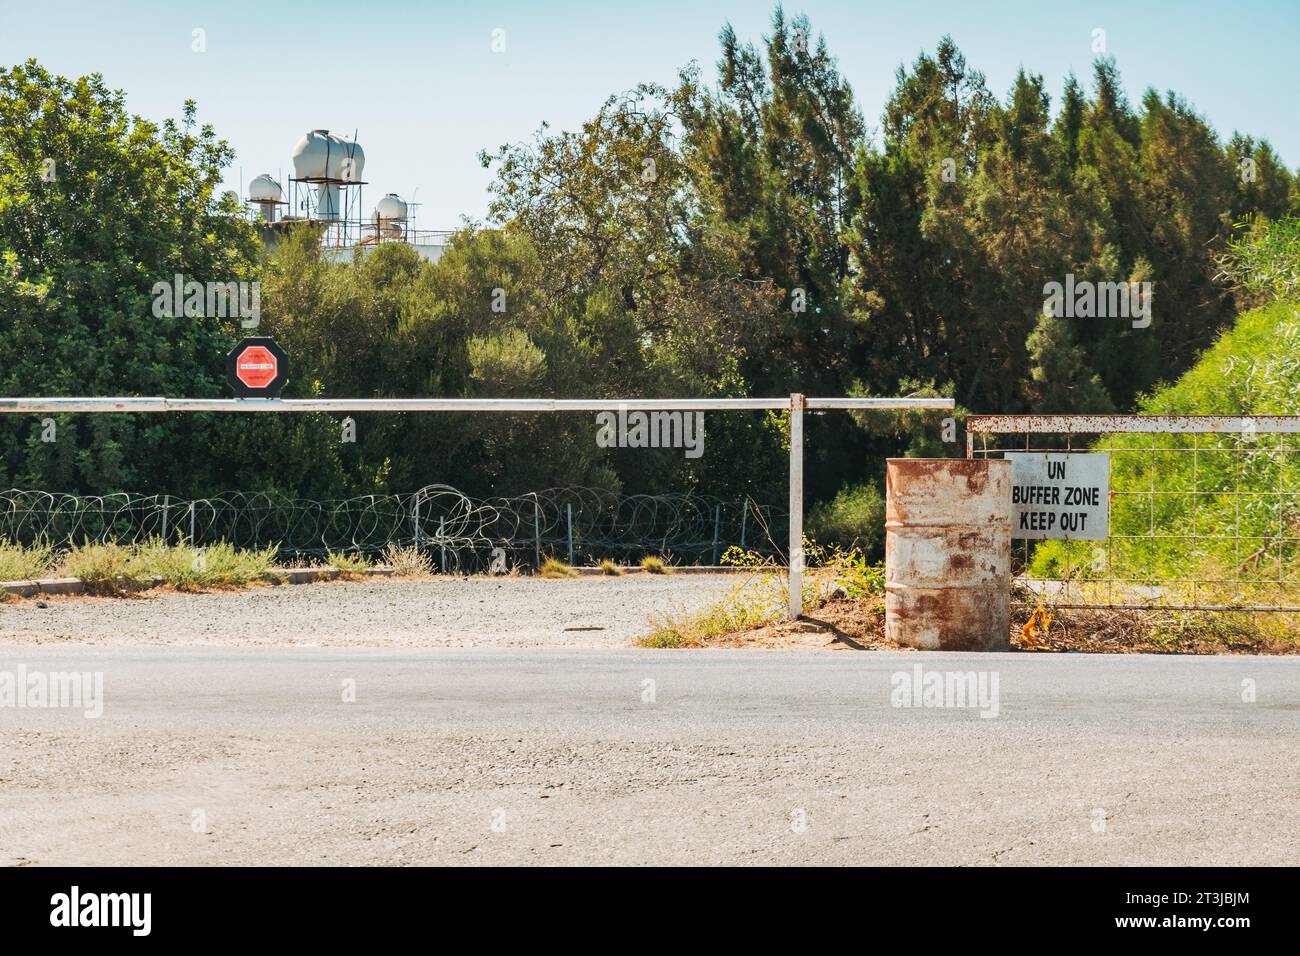 a sign reads 'UN Buffer Zone, Keep Out' at a border crossing between the northern and southern regions of the island of Cyprus Stock Photo